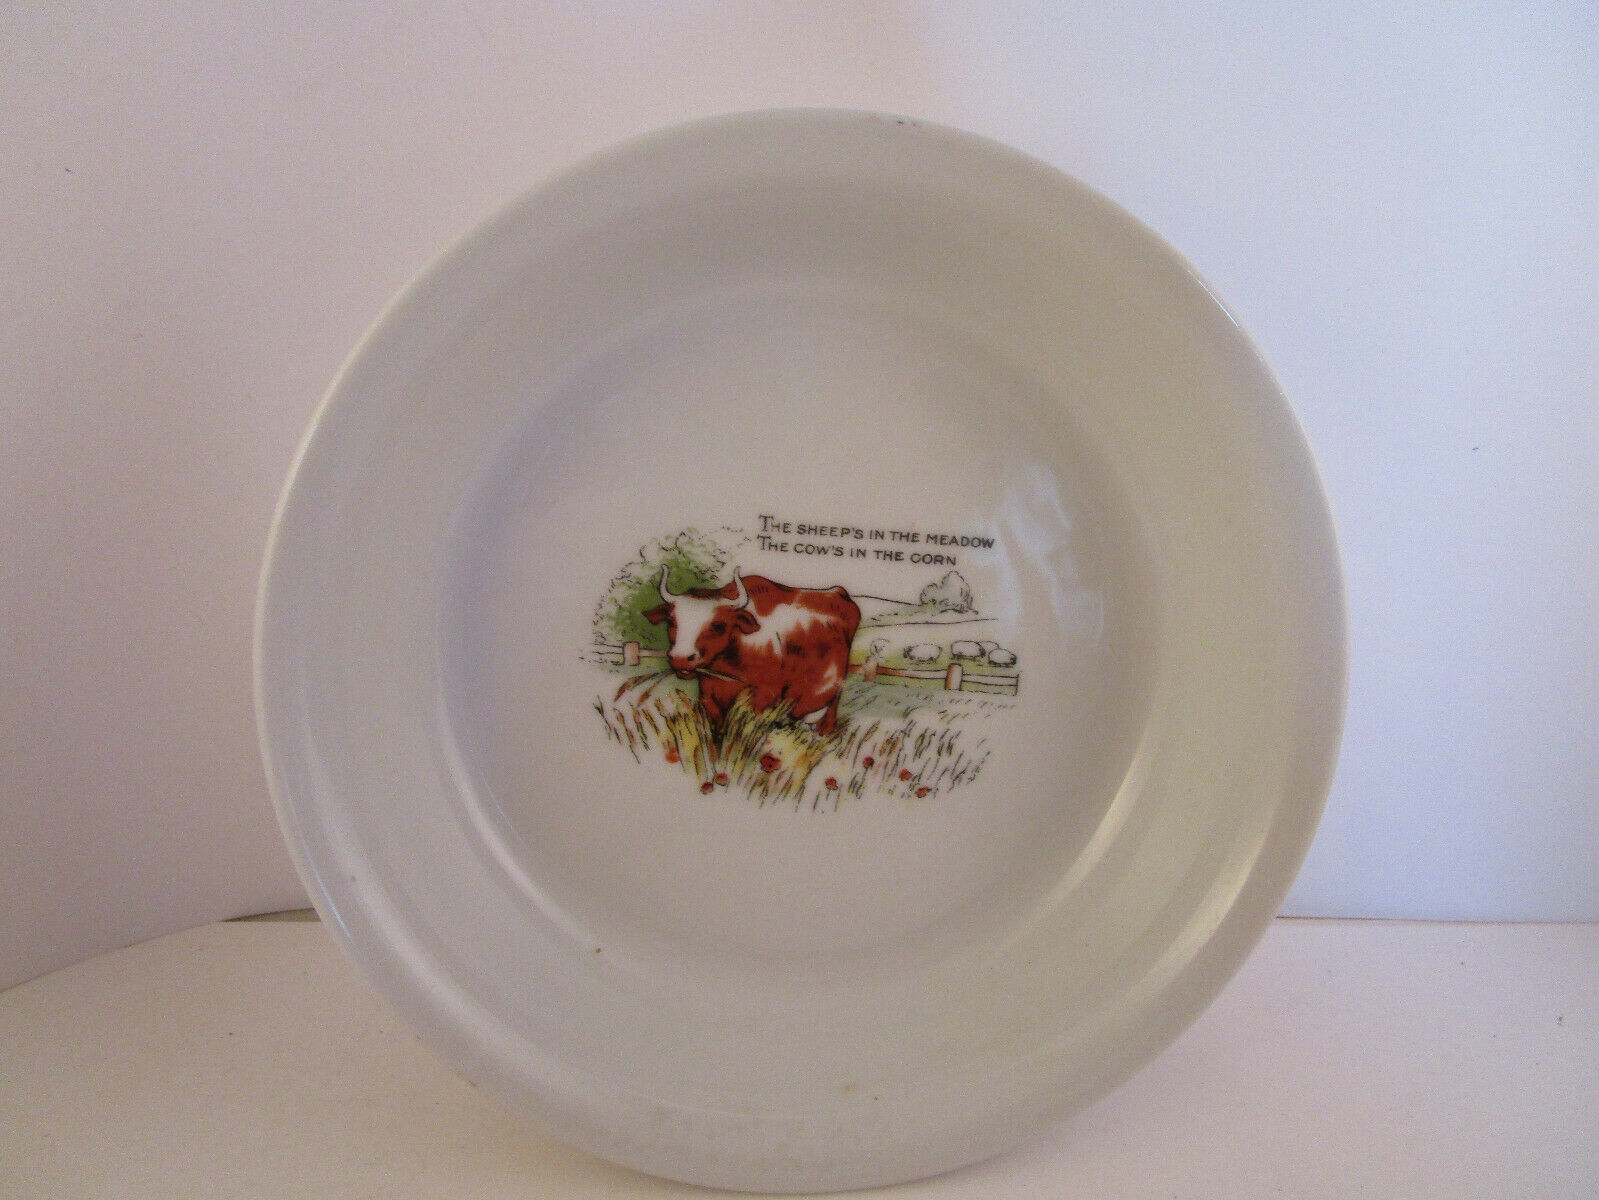 Vintage Lg Co Germany Child's Cereal Bowl Sheeps In The Meadow Cows In Corn